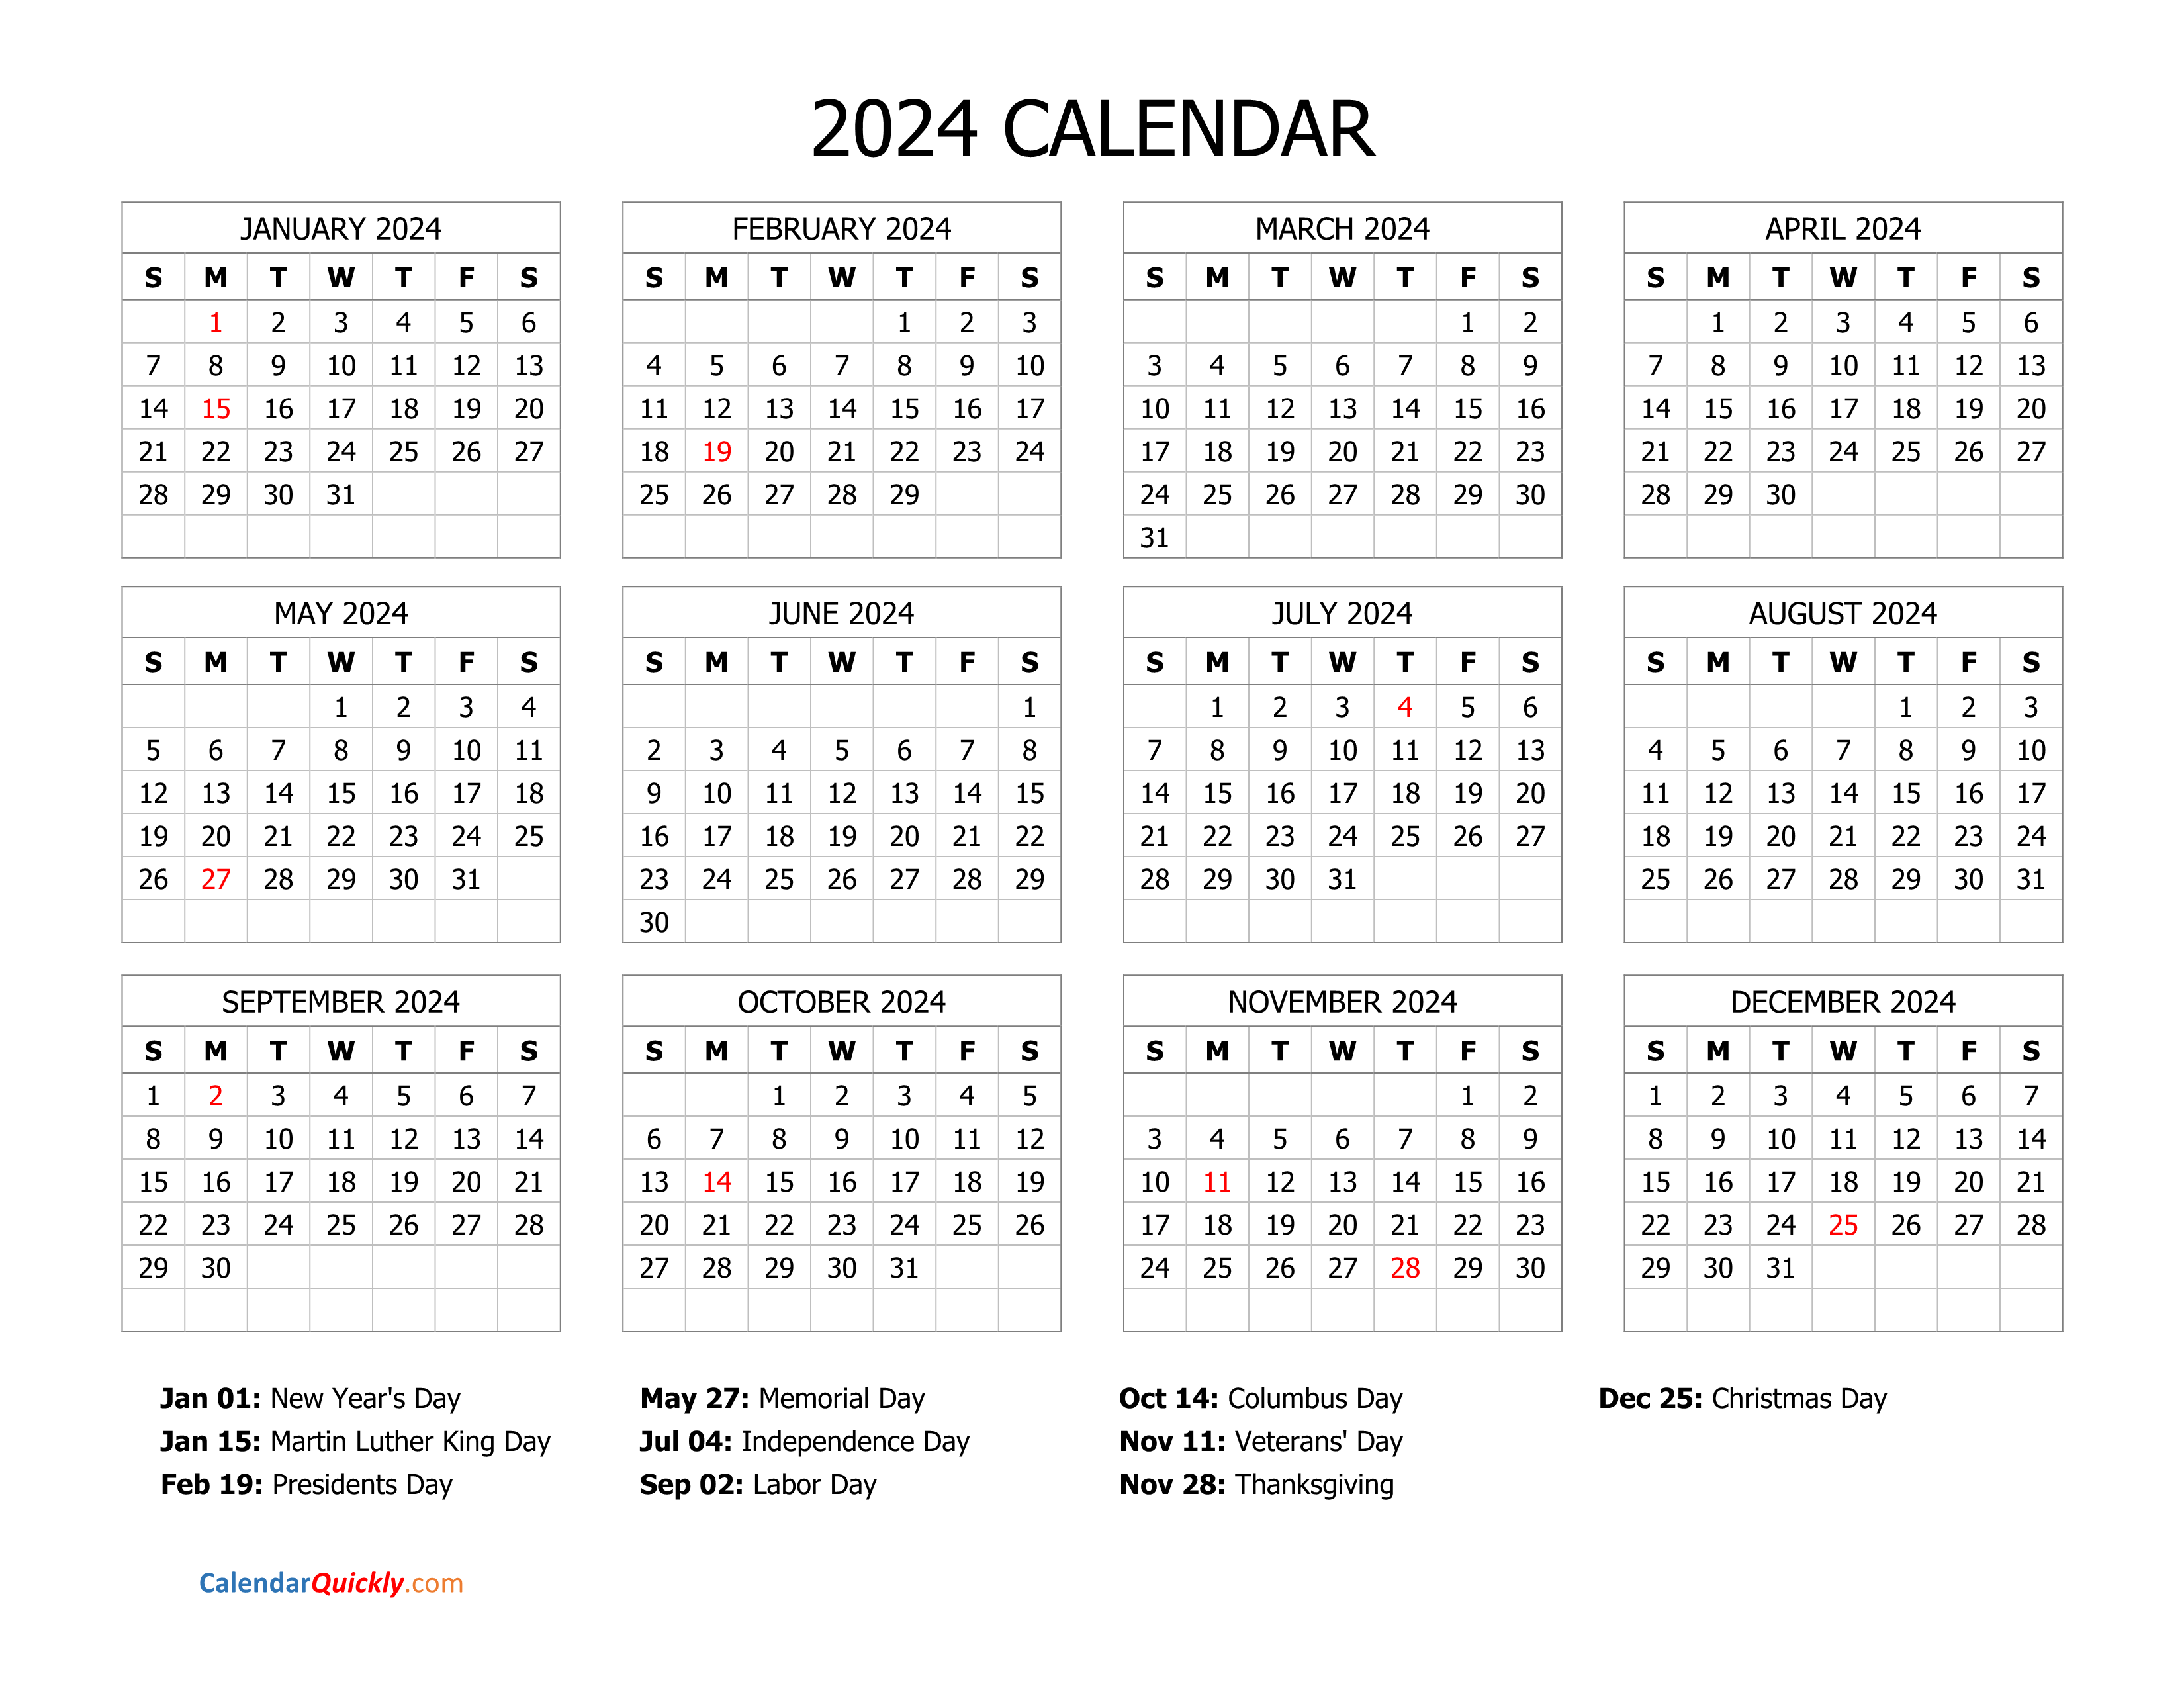 2024 Calendar Free Printable | Free Printable 2024 Calendar With Holidays By Month